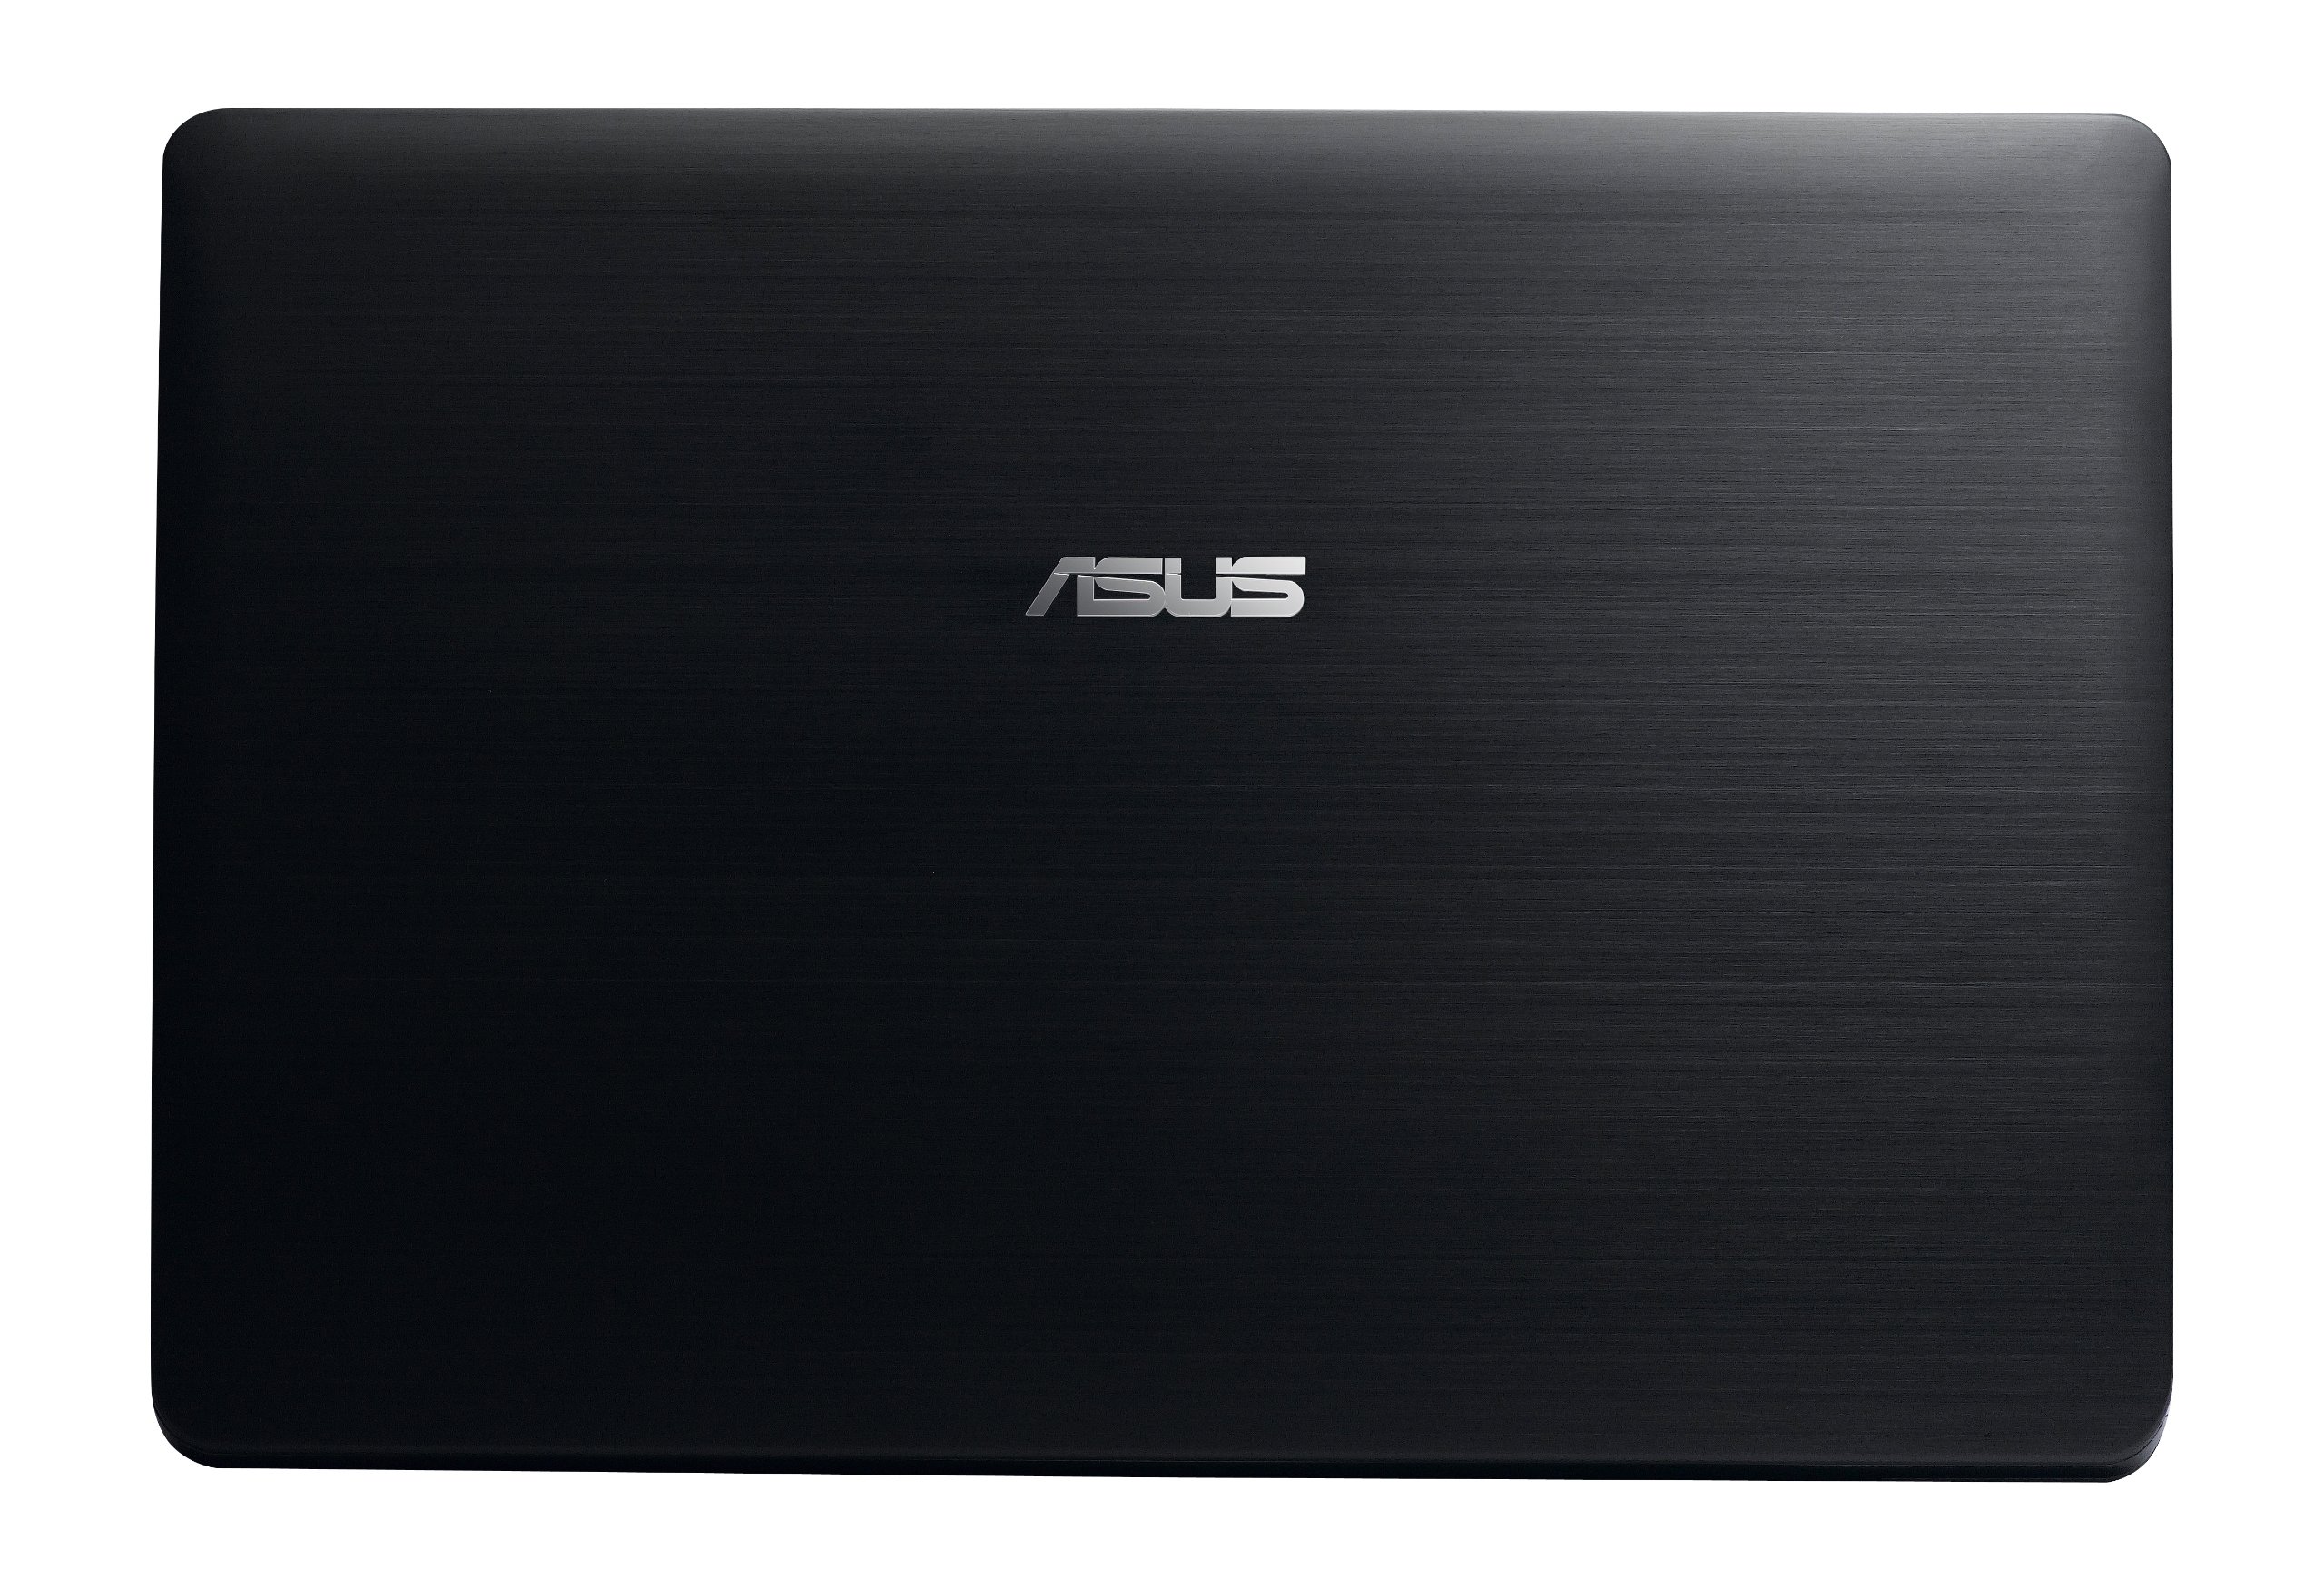 ASUS UX30-A1 Thin and Light 13.3-Inch Black Laptop (Windows 7 Home Premium)